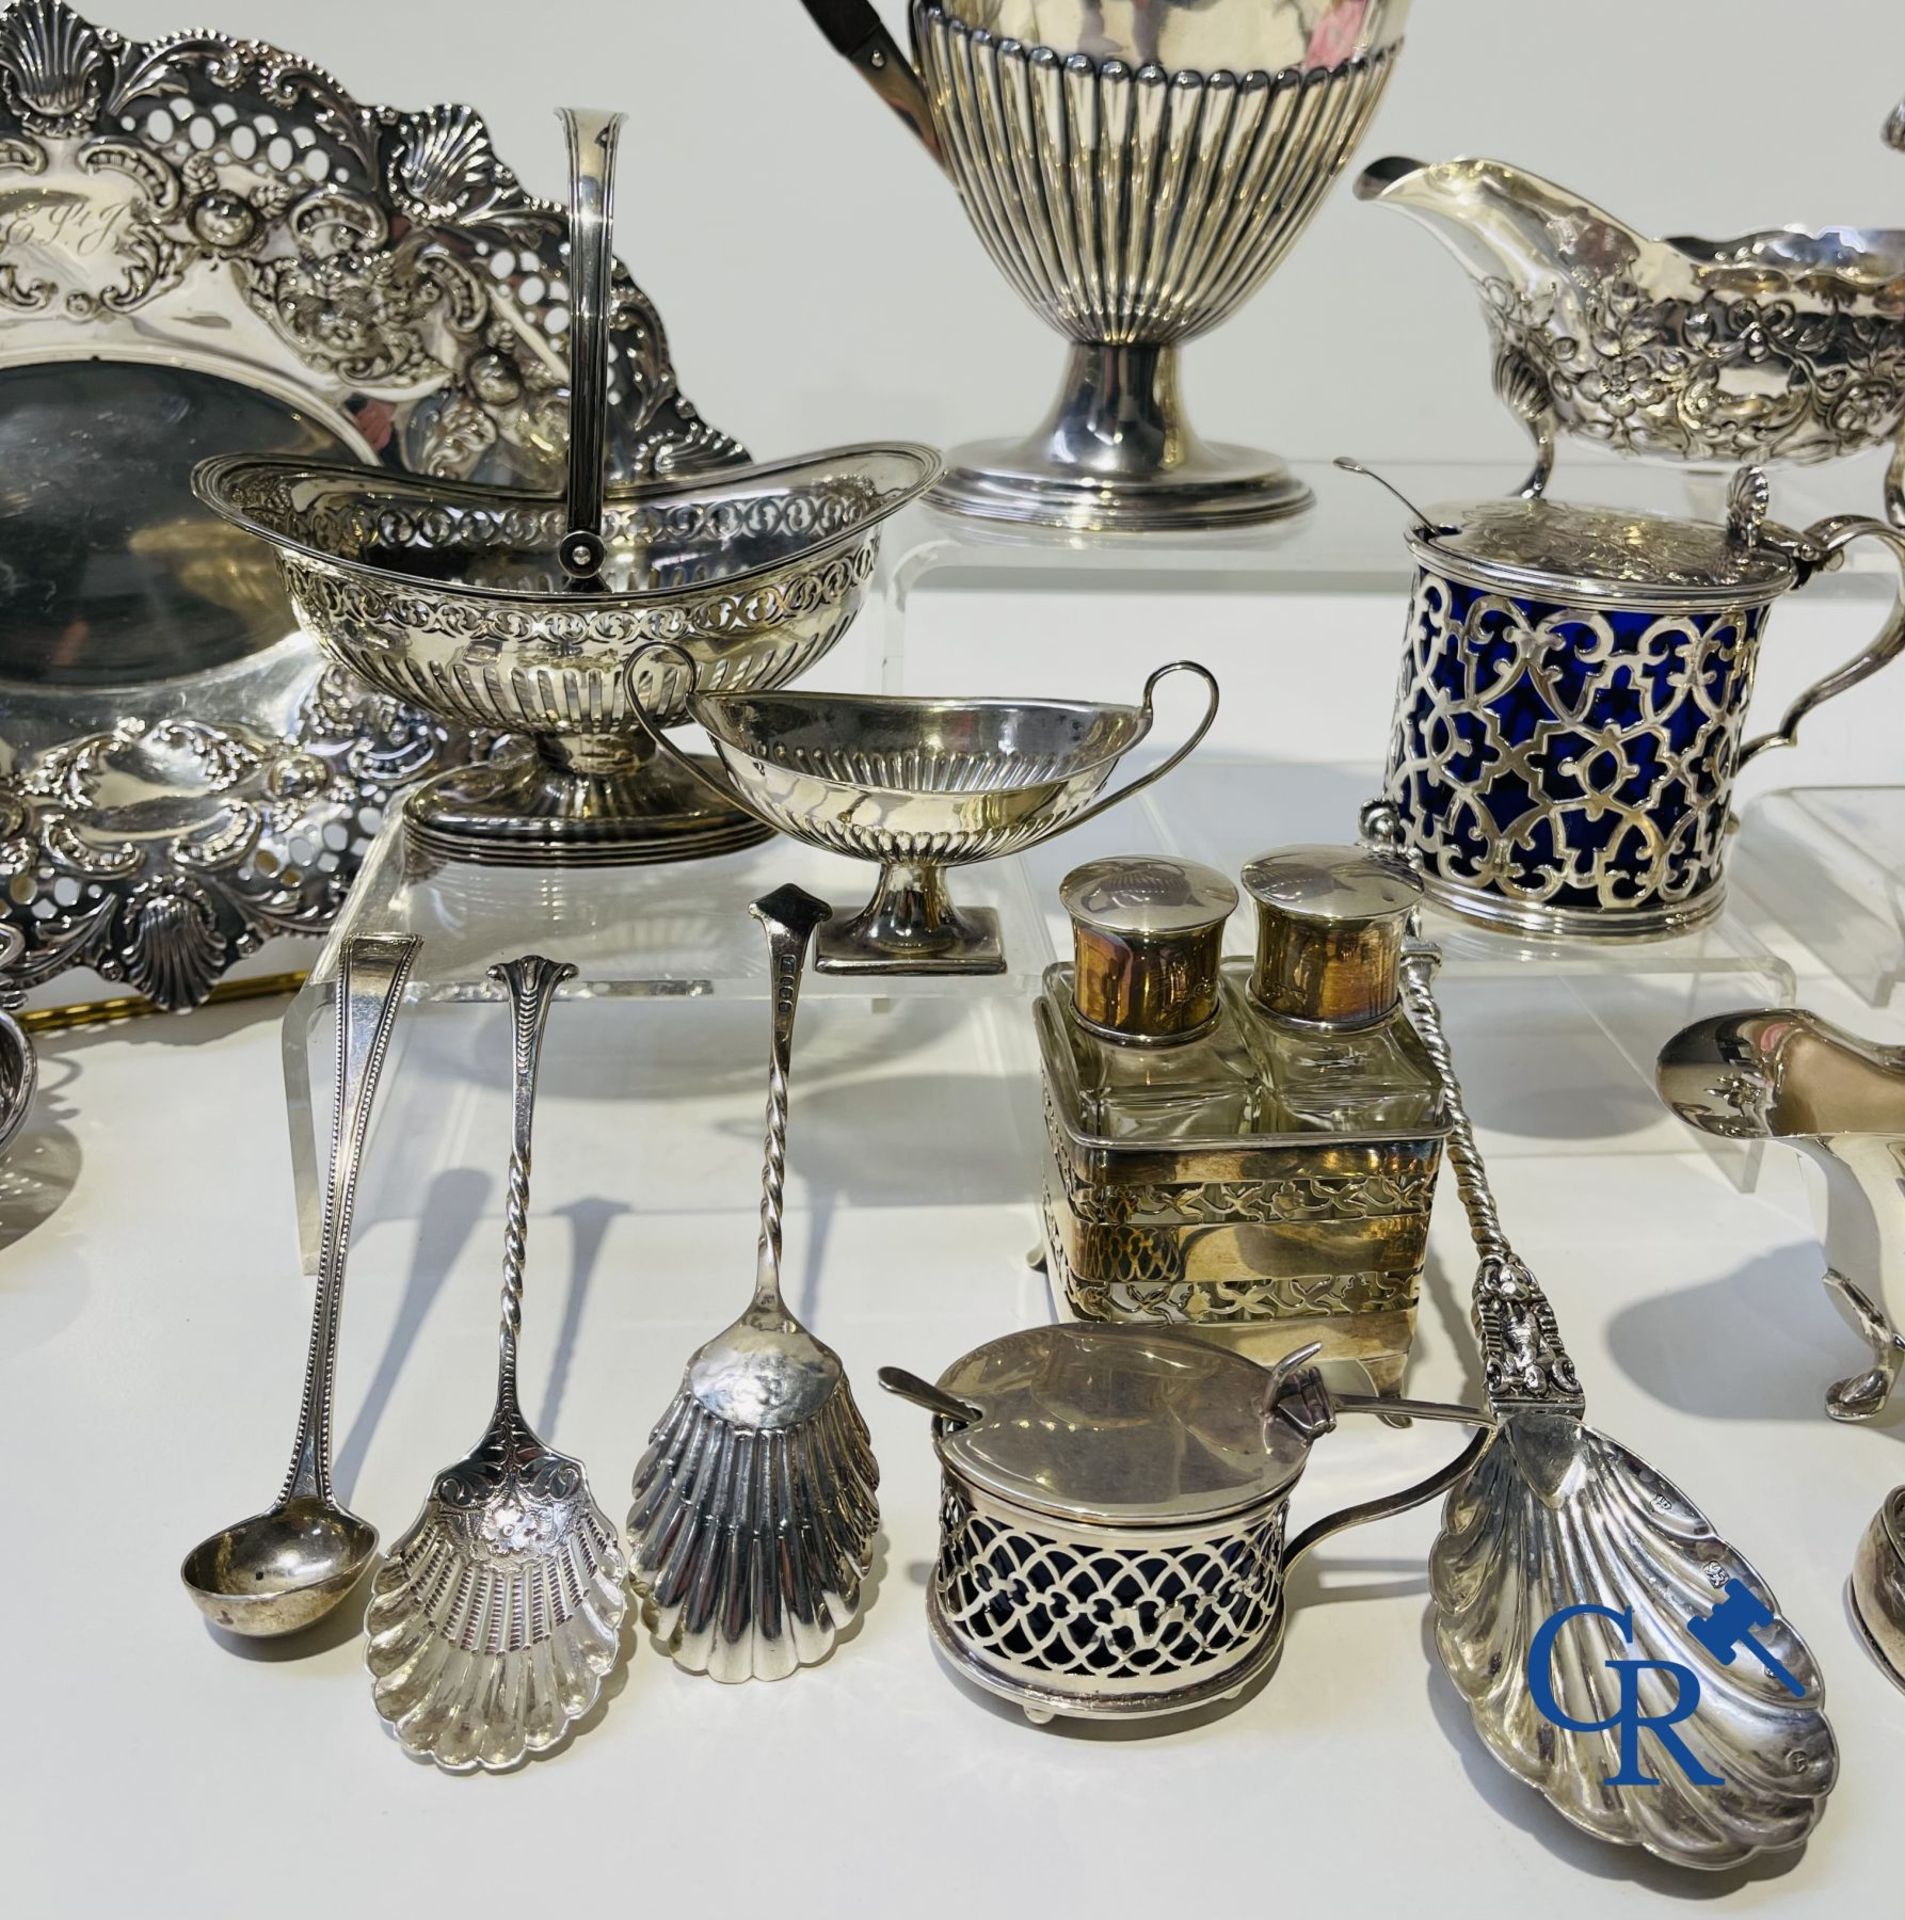 Silver: Important lot with various pieces of English silver. (various hallmarks) 19th-20th century. - Image 4 of 19